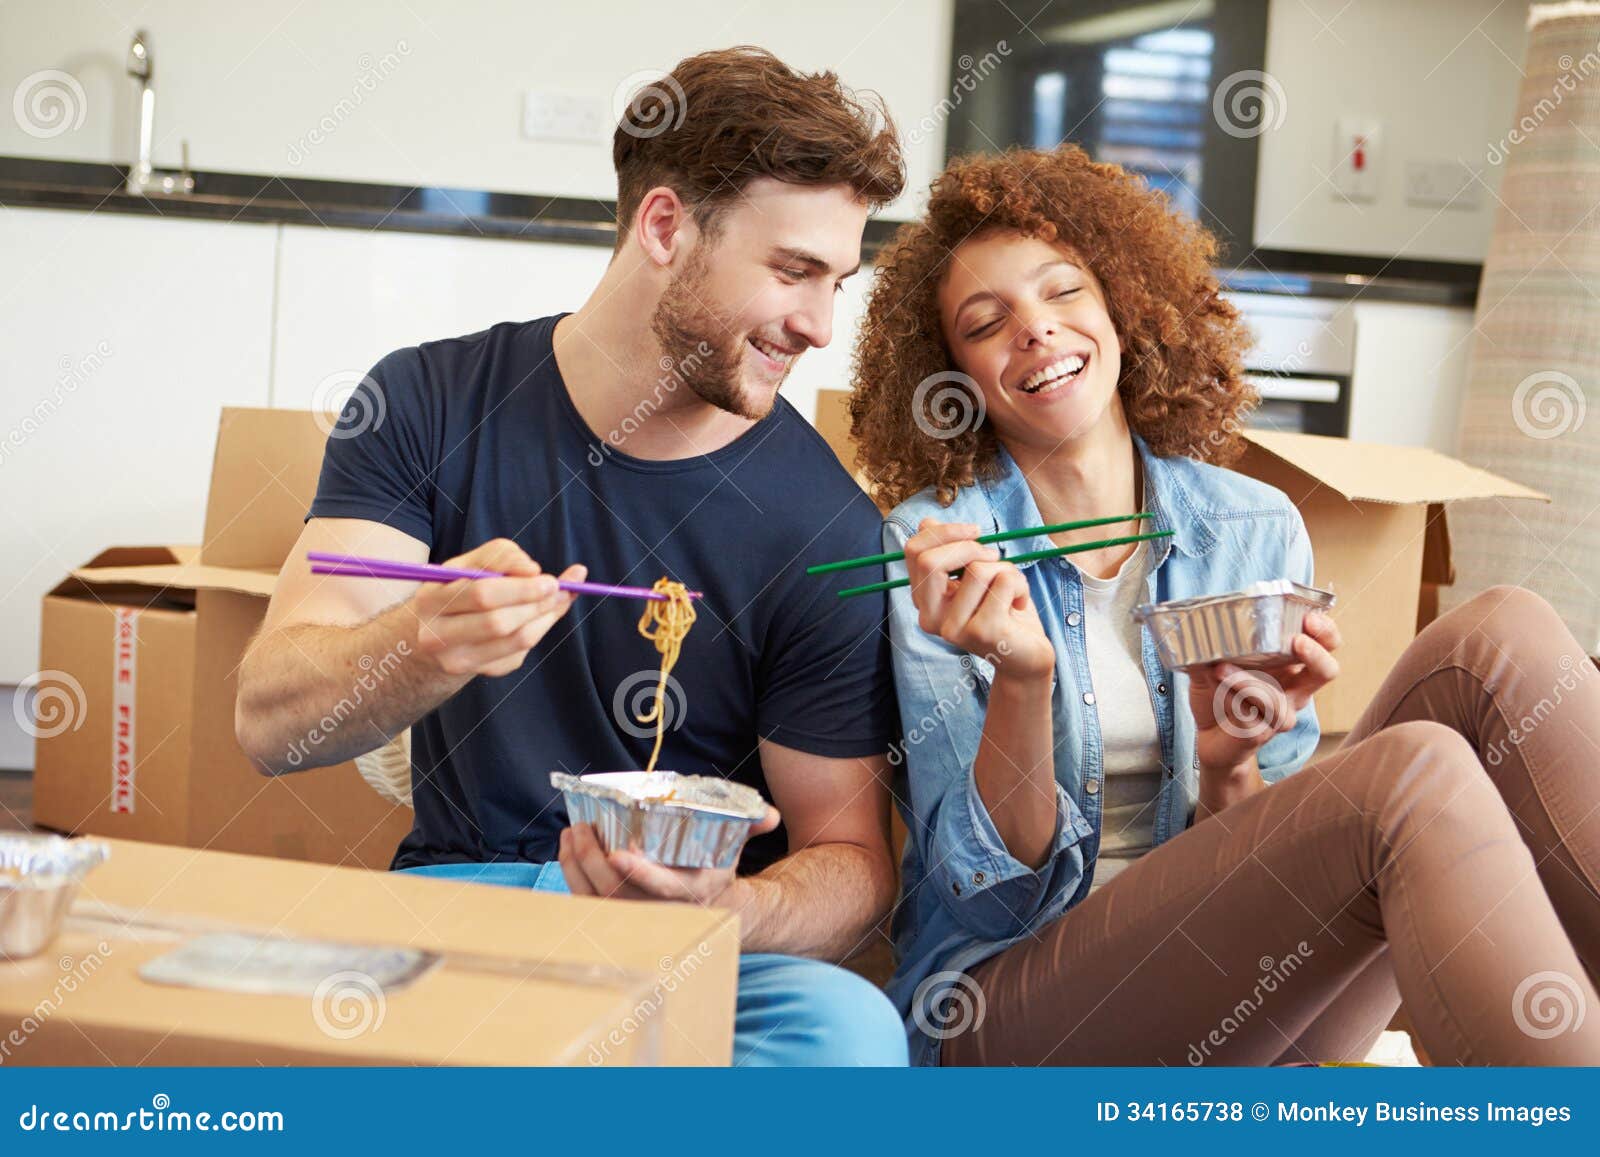 439 Mcdonalds Happy Meal Stock Photos - Free & Royalty-Free Stock Photos  from Dreamstime